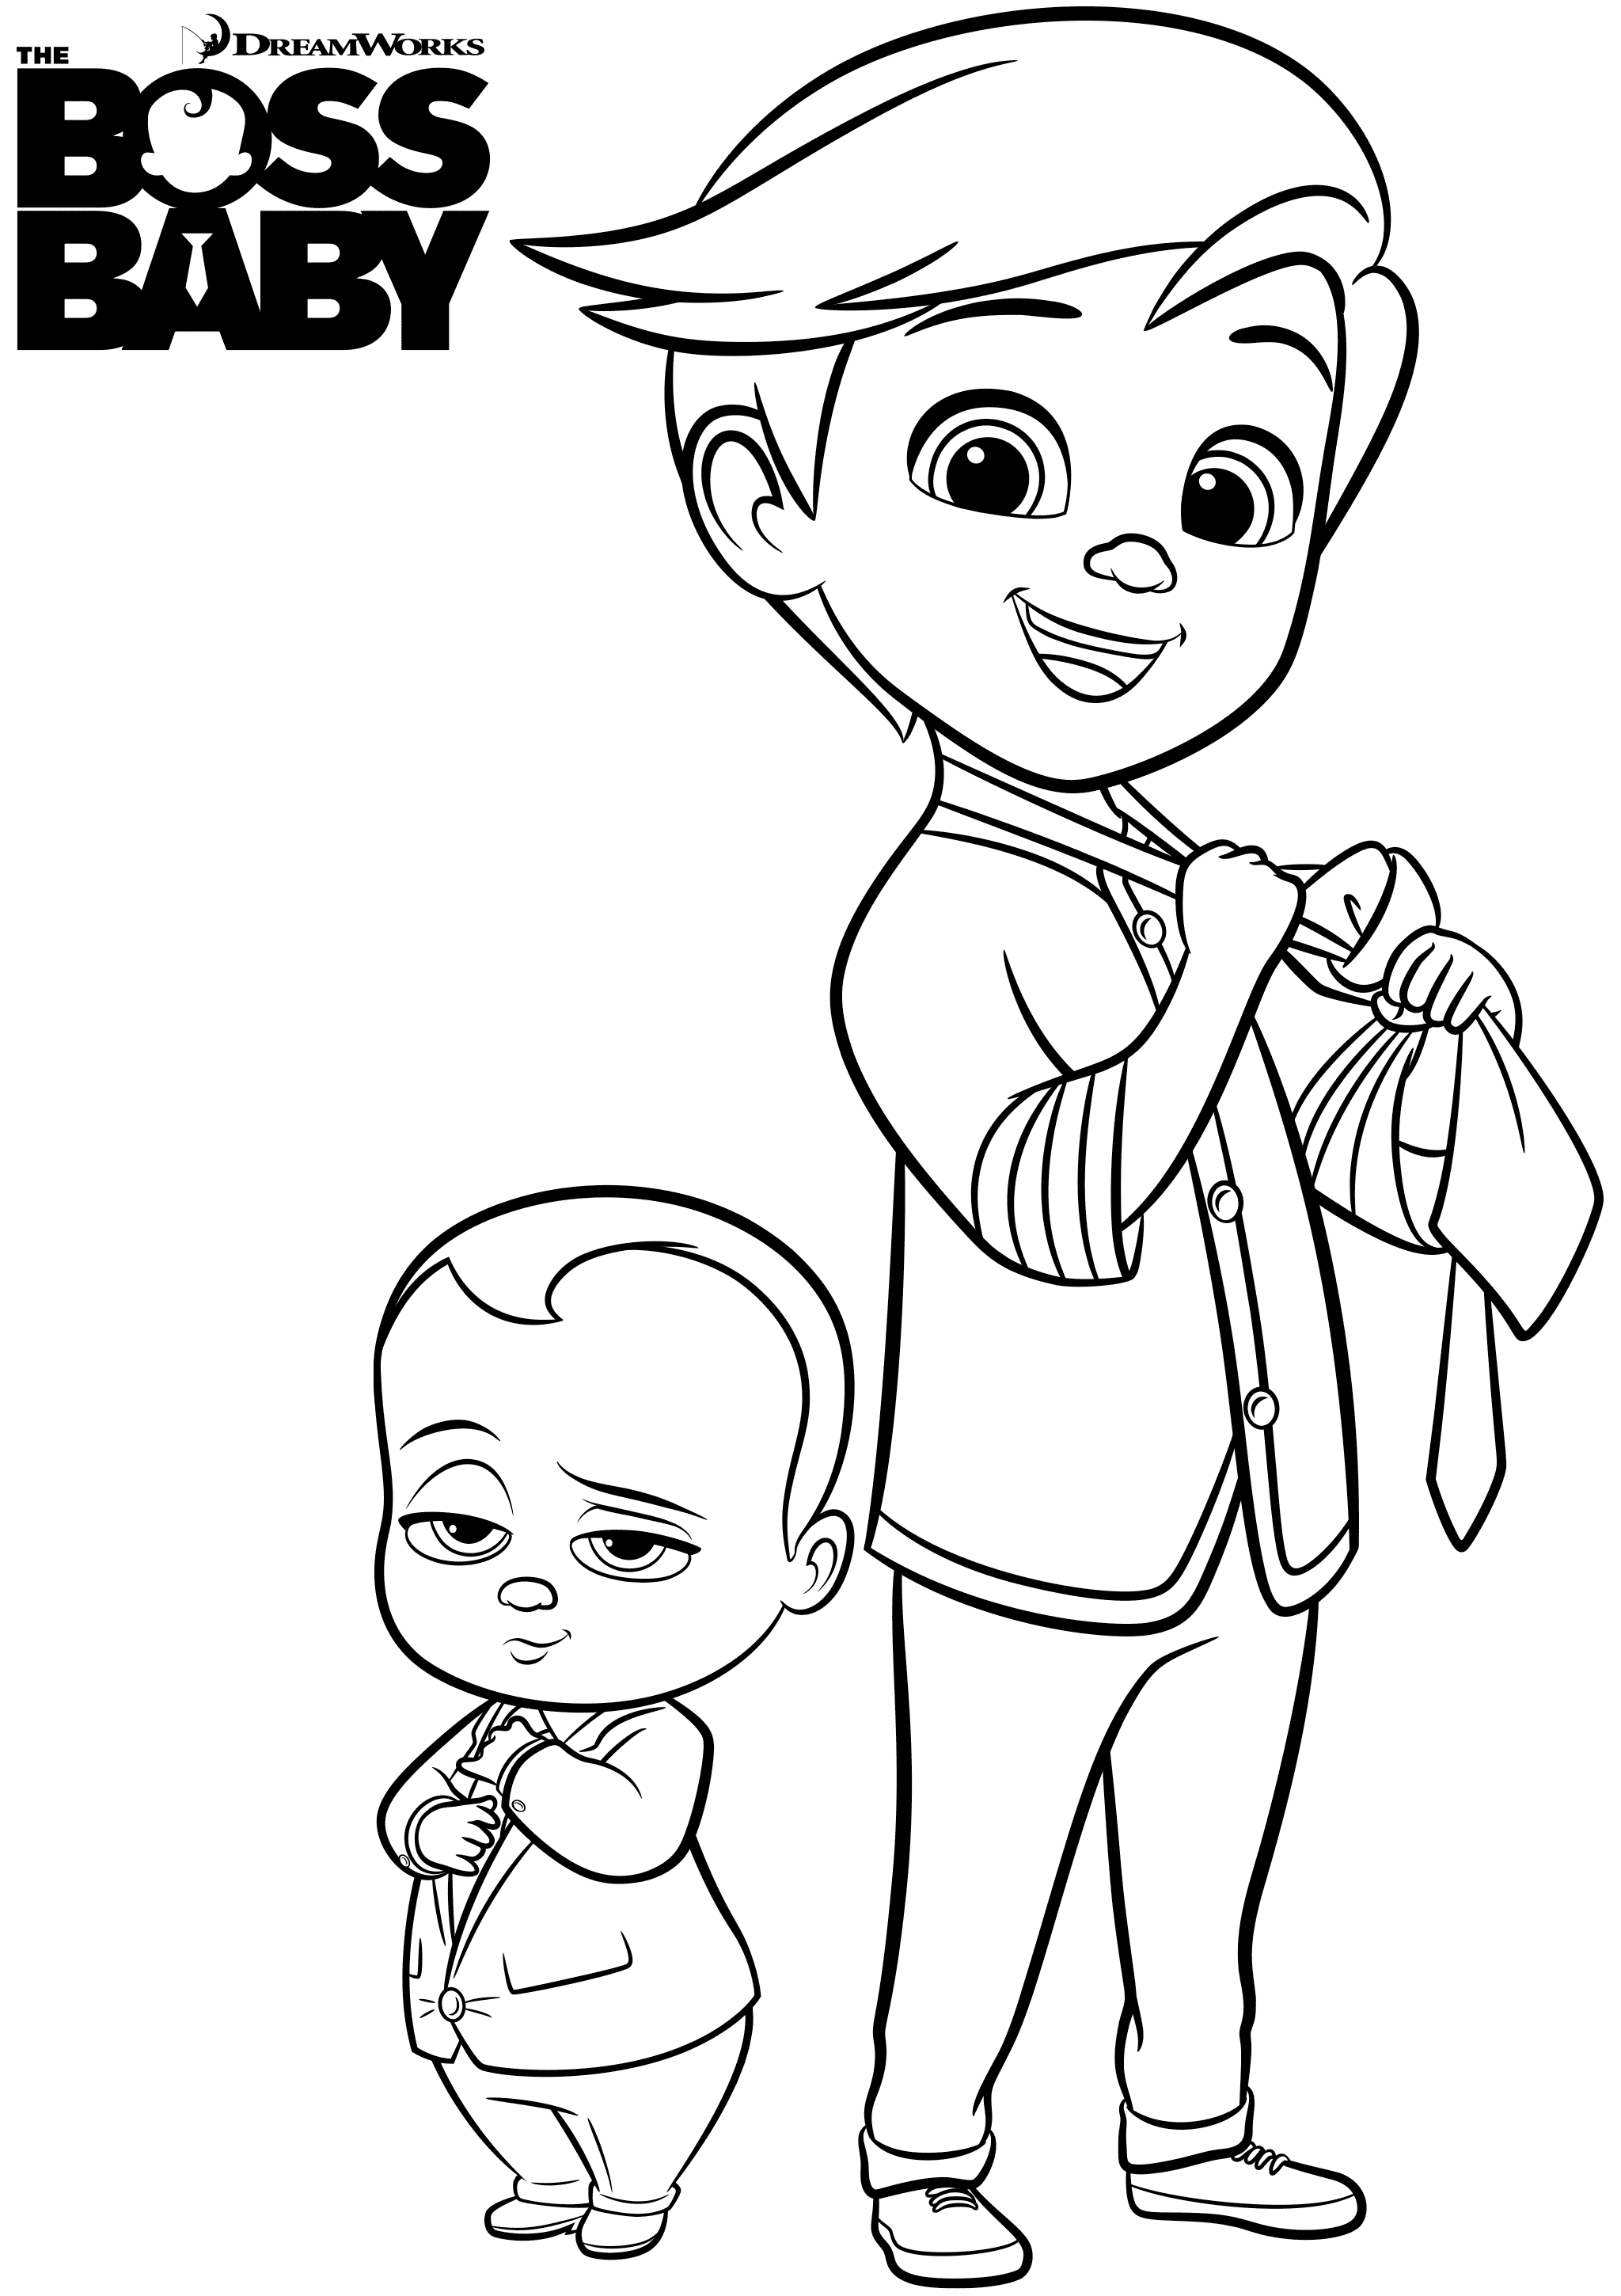 Boss Baby Coloring Pages   Free Printable Coloring Pages for Kids